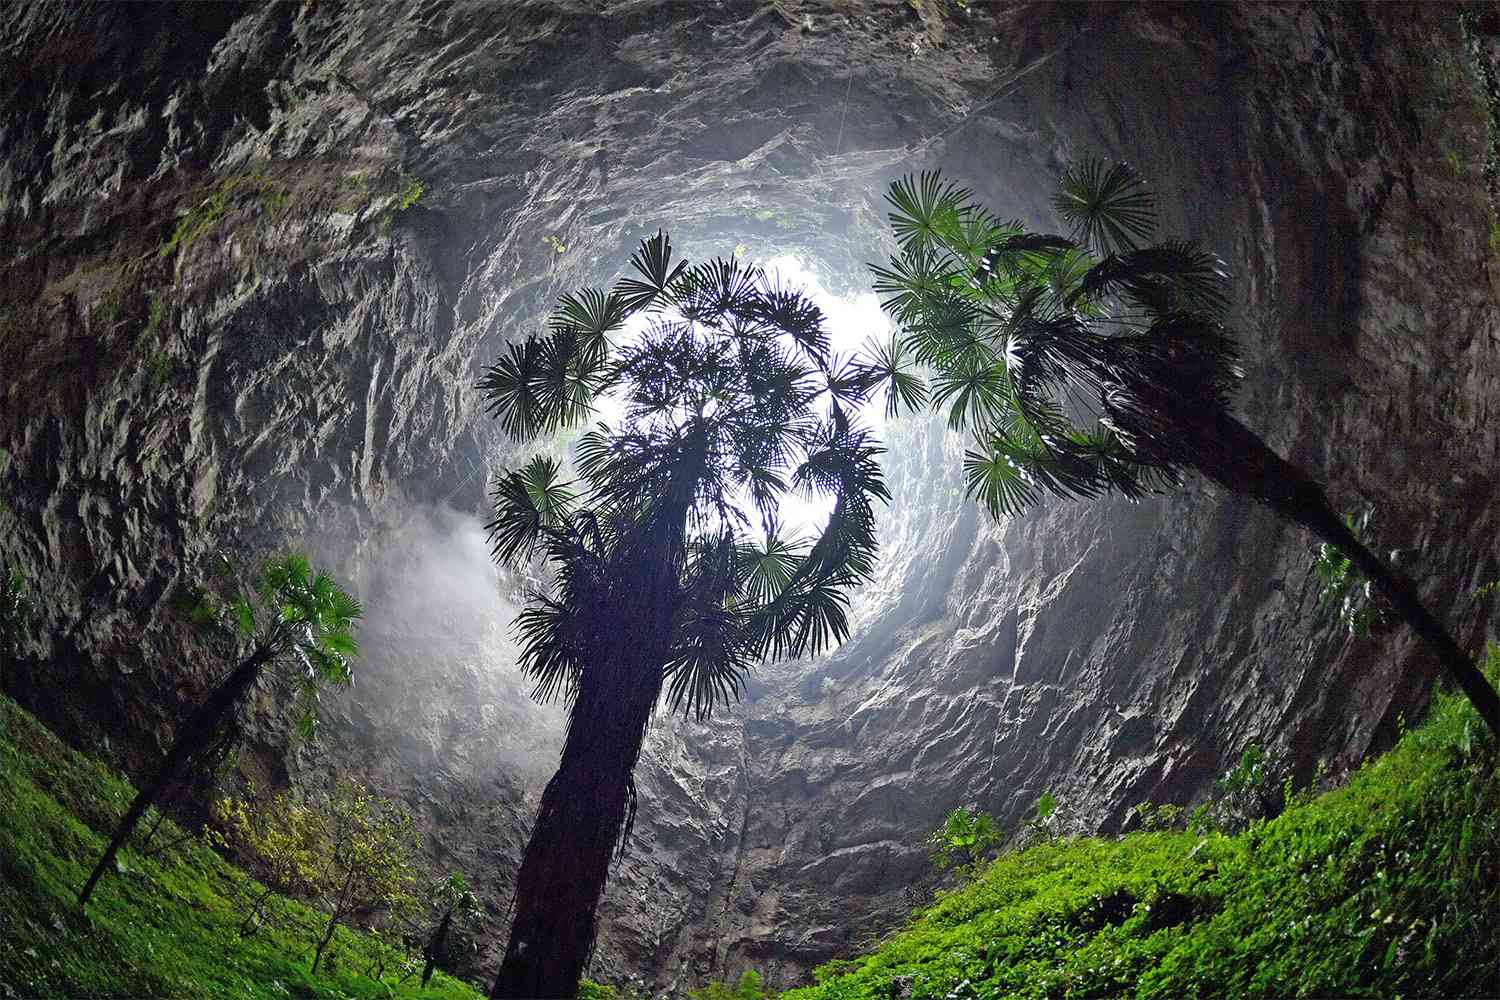 ENSHI, Oct. 10, 2020 -- Photo taken on Oct. 10, 2020 shows palm trees in a Tiankeng, or giant karst sinkhole, at Luoquanyan Village in Xuan'en County, Enshi Tujia and Miao Autonomous Prefecture, central China's Hubei Province. (Photo by Song Wen/Xinhua via Getty) (Xinhua/Song Wen via Getty Images)